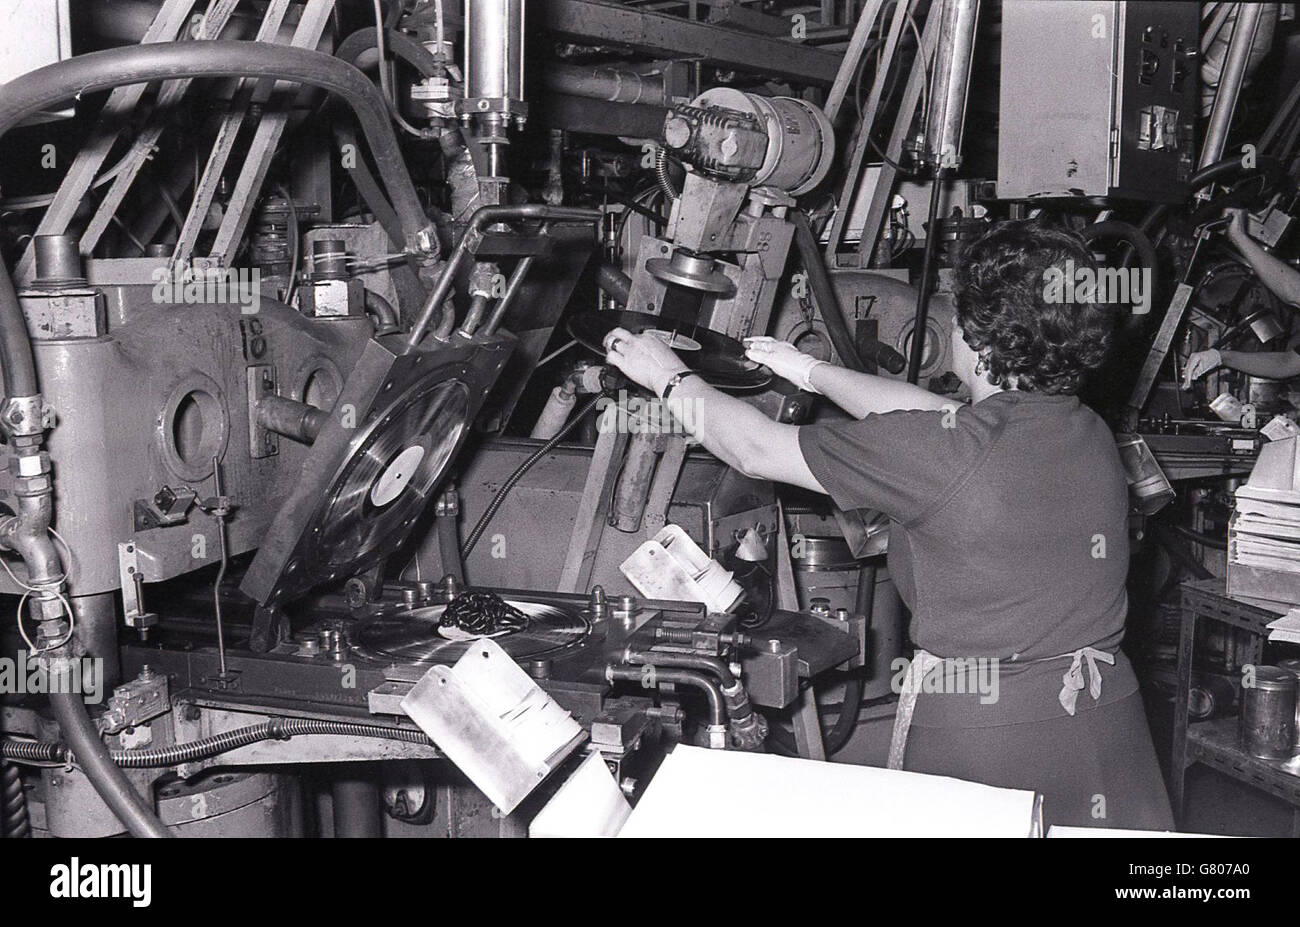 1970s, female factory worker using a machine or tool to produce LP's or vinyl records. Stock Photo